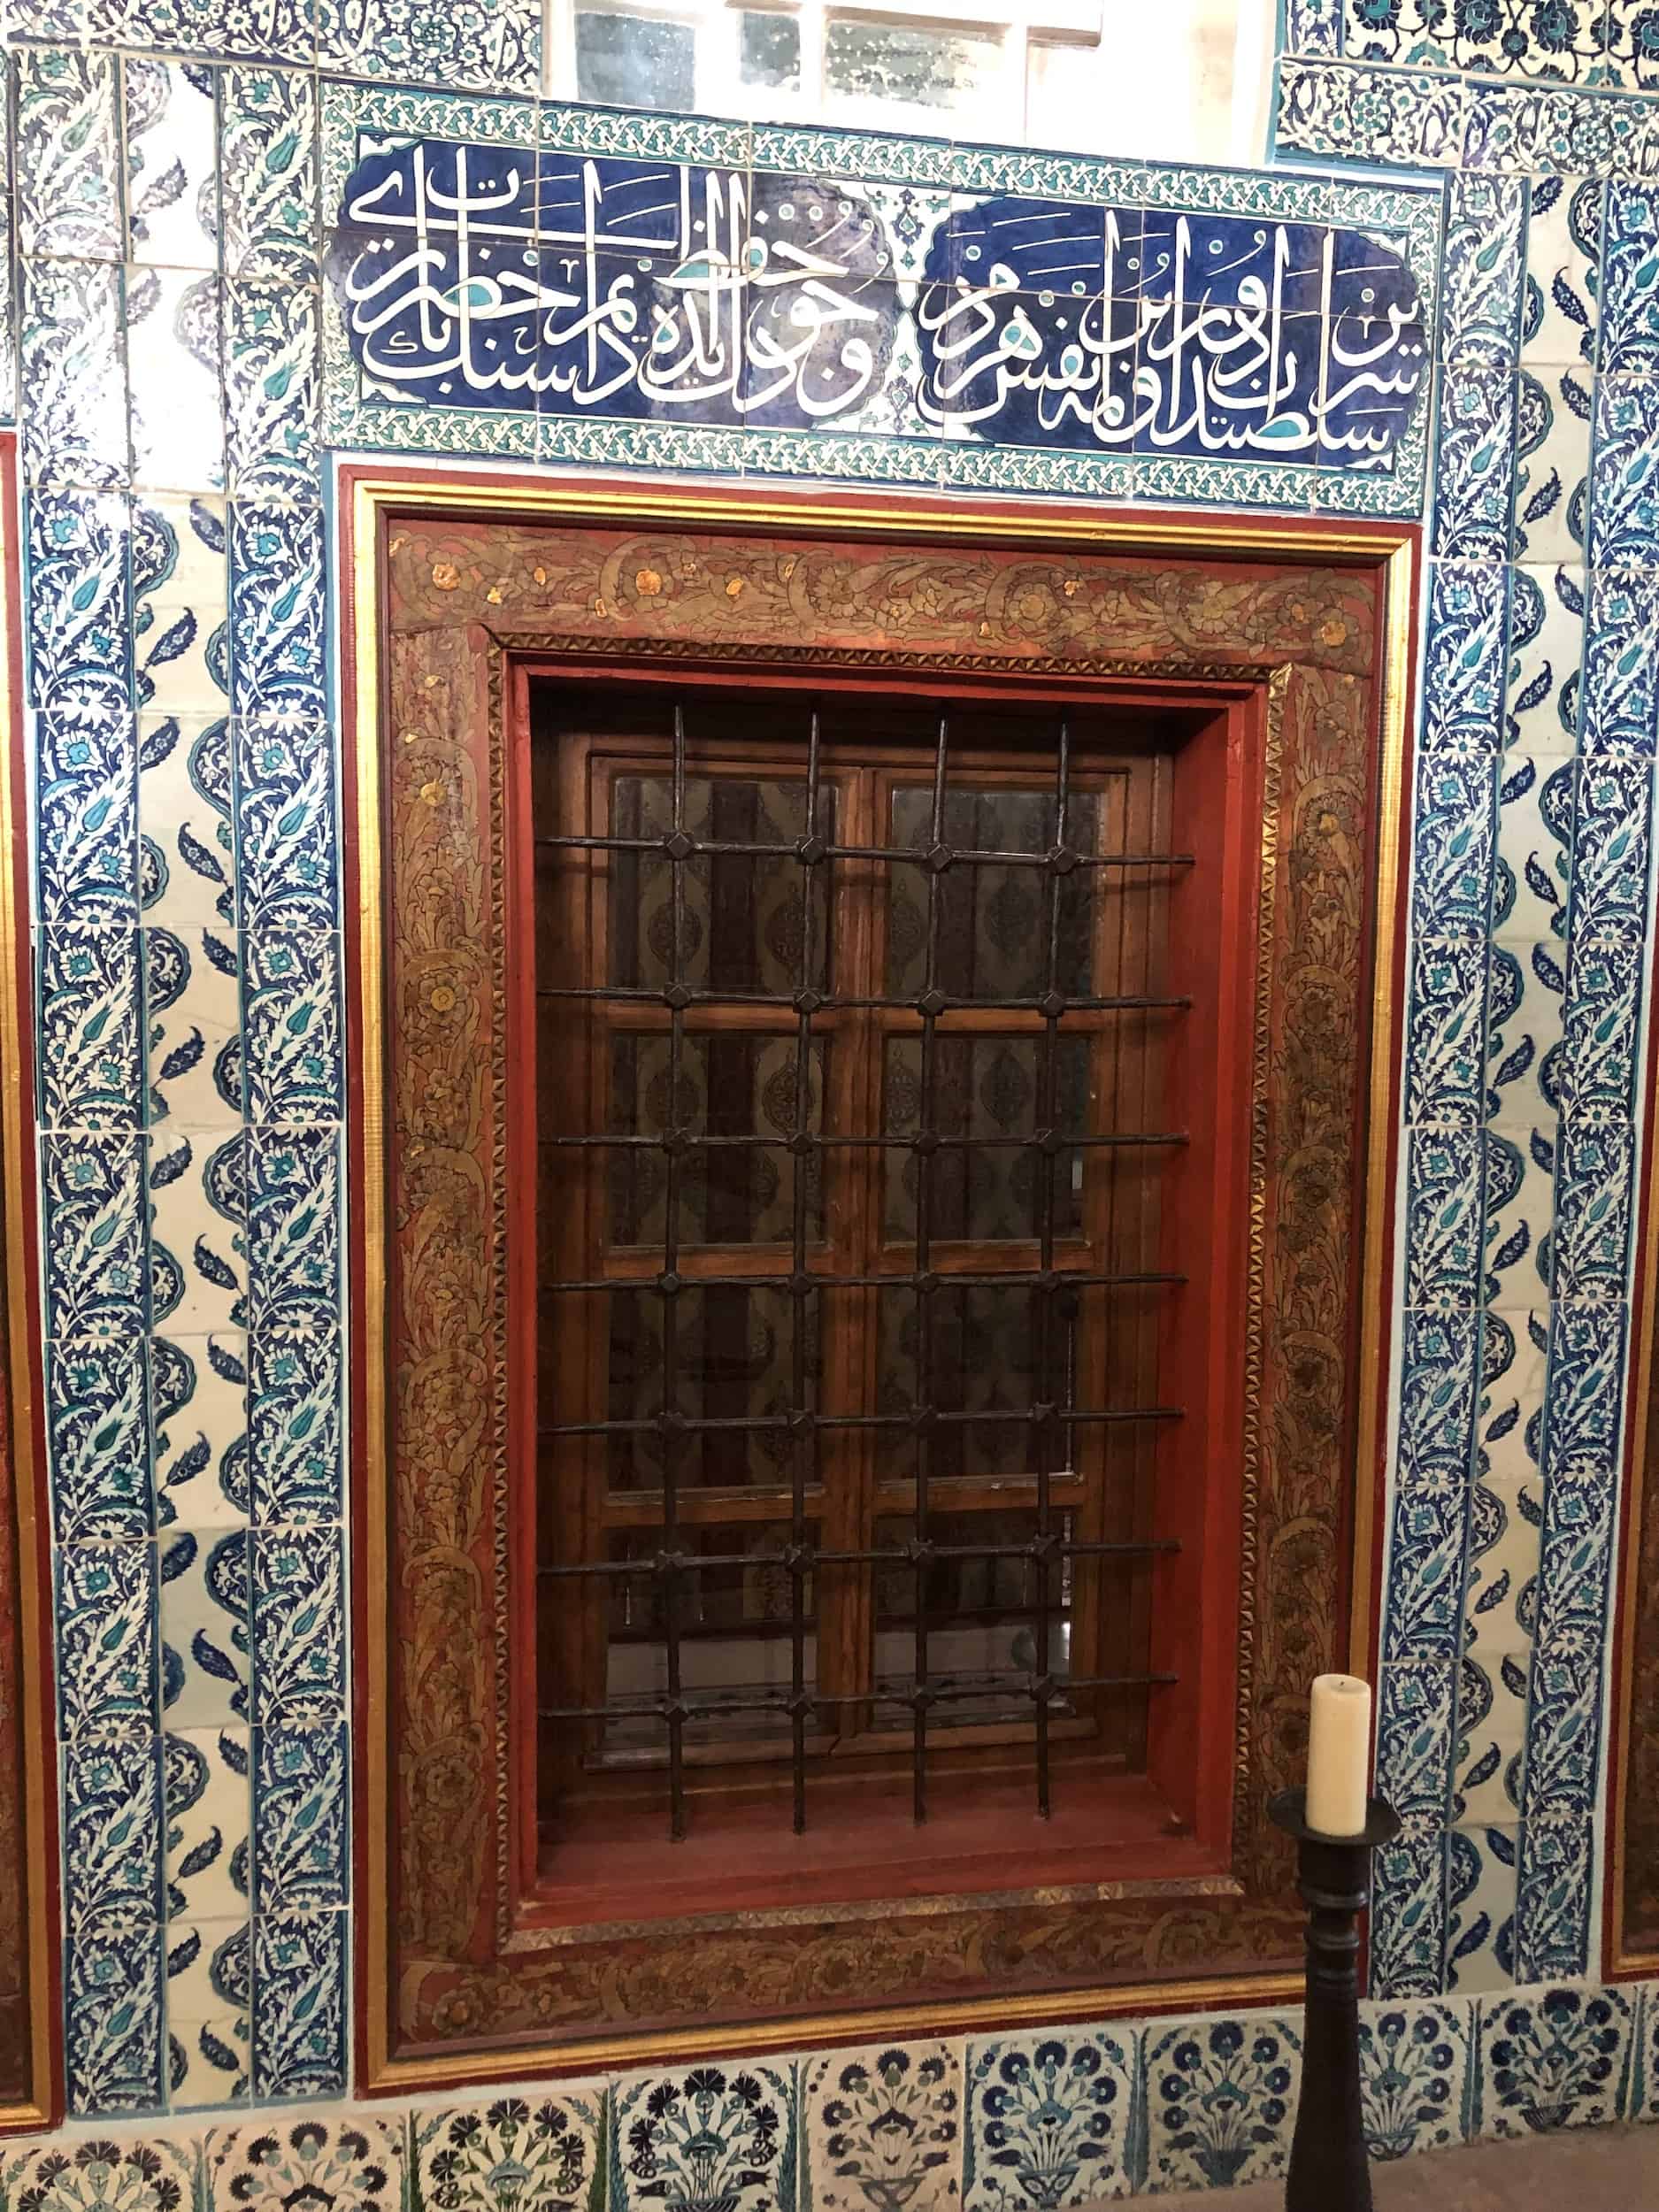 Window at the Sultan's Pavilion